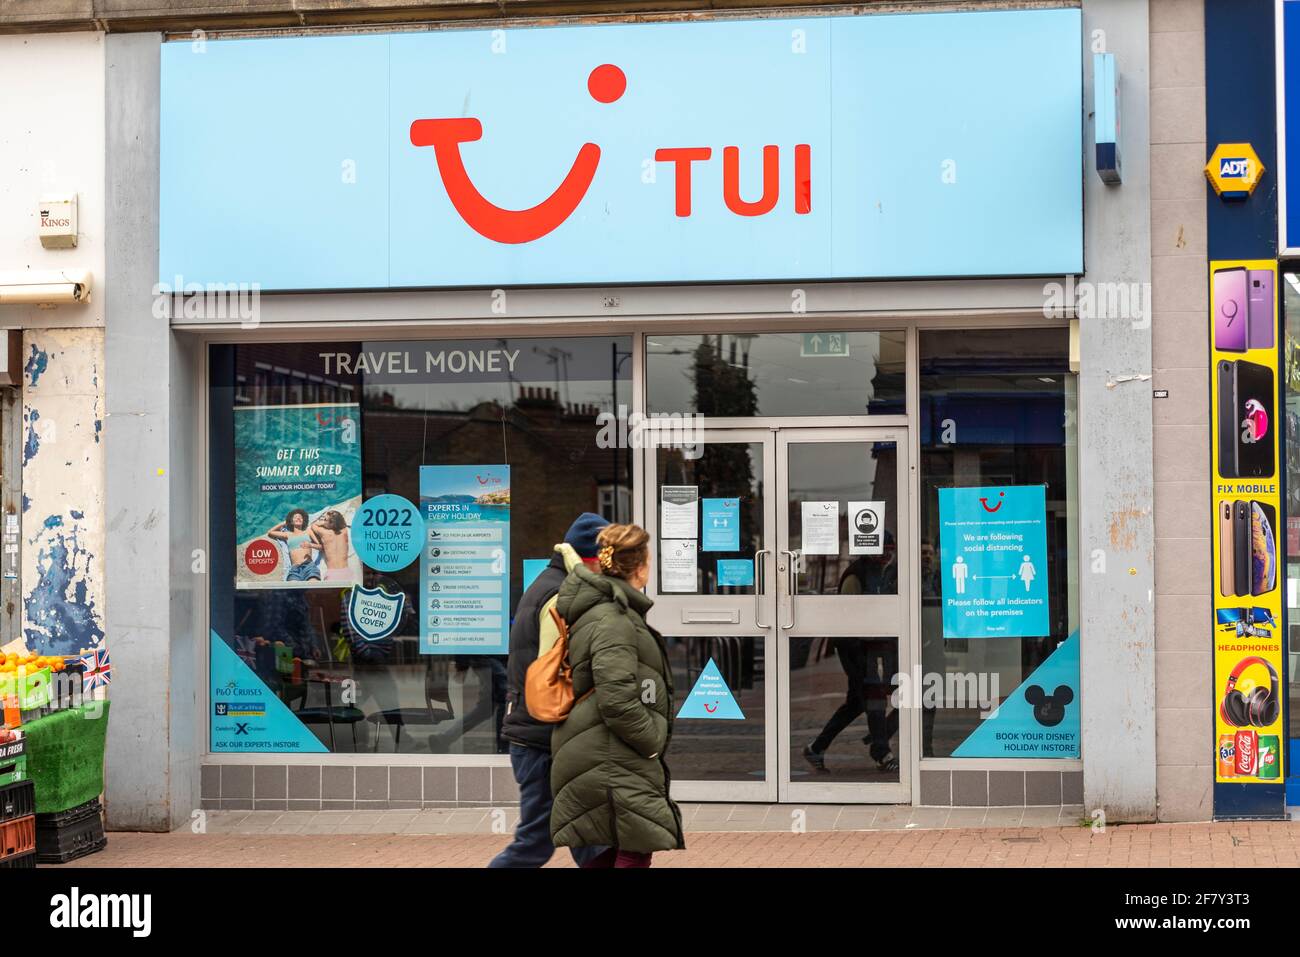 Tui travel agent shop, store in High Street, Southend on Sea, Essex, UK, closed during COVID 19. Tui AG, Tui Group travel agency. People passing Stock Photo